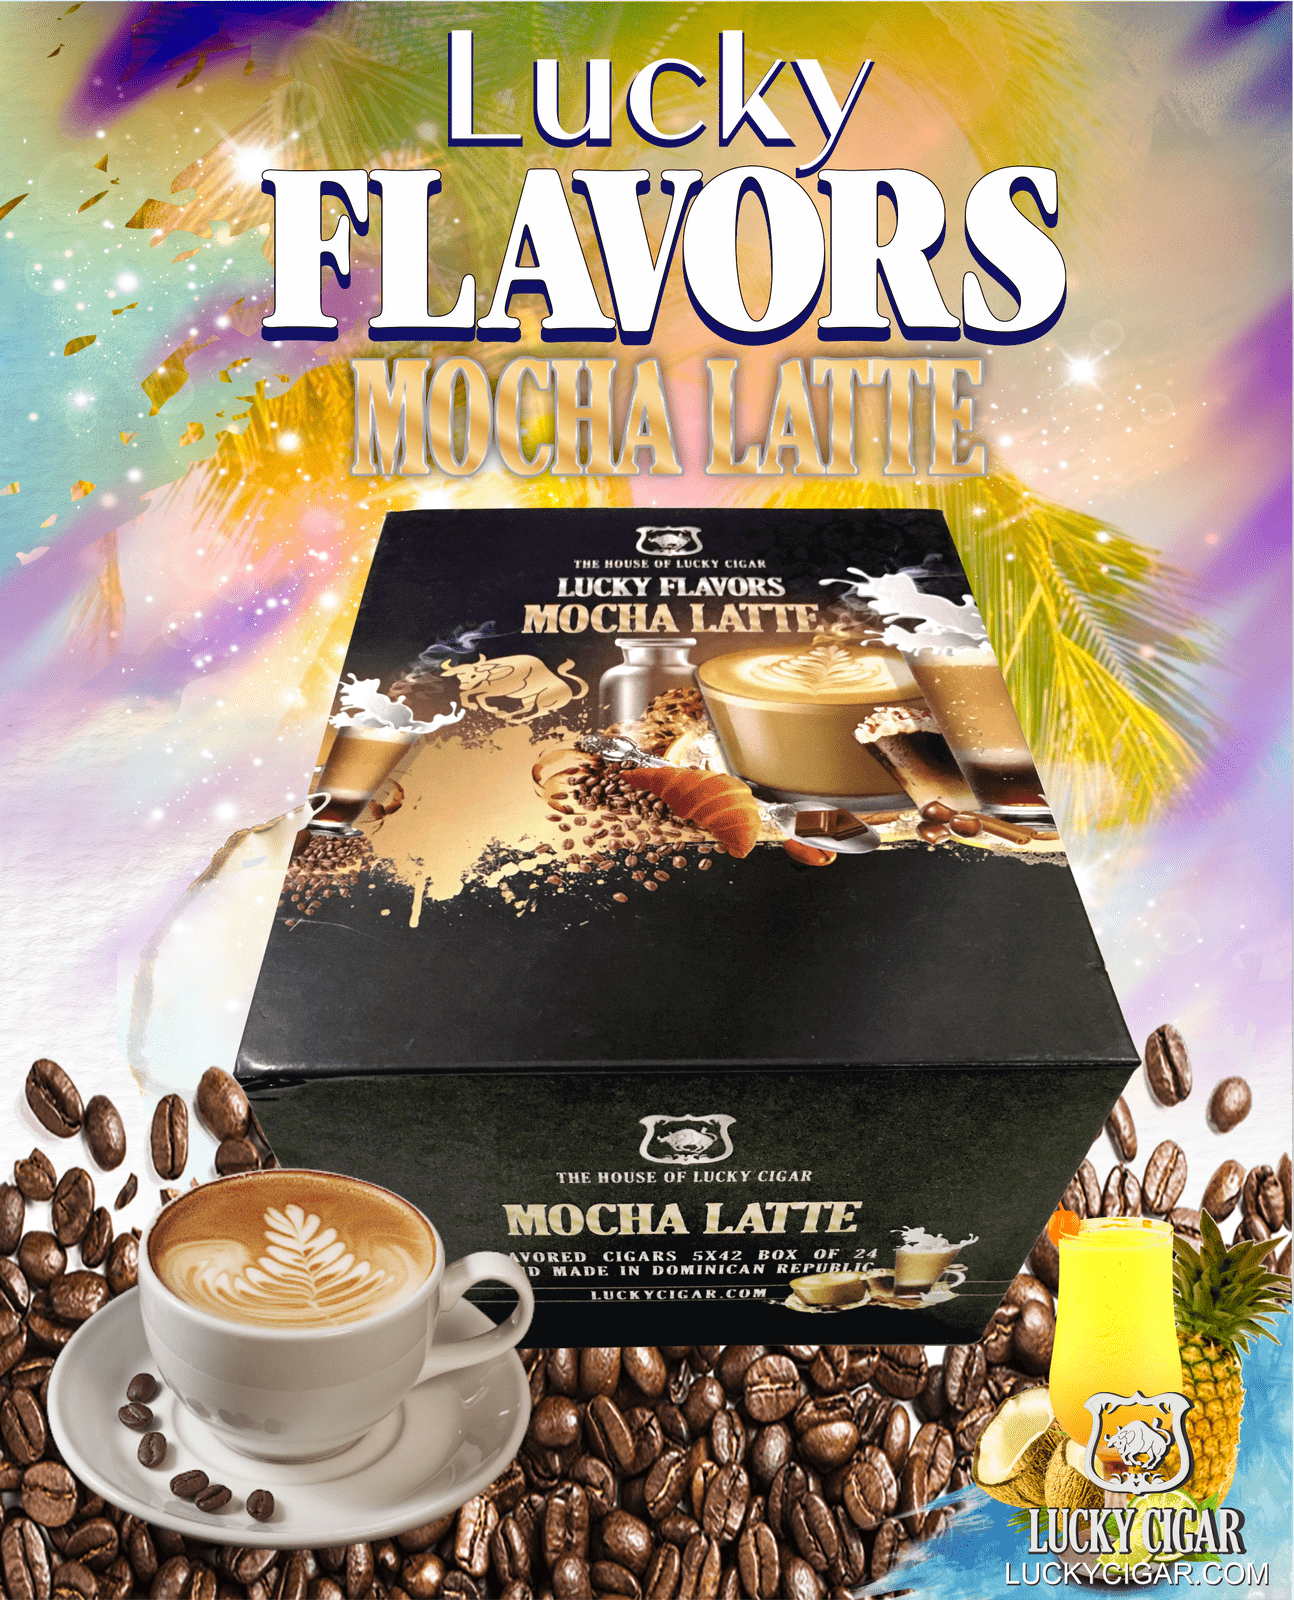 Flavored Cigars: Lucky Flavors Mocha Latte 5x42 Box of 24 Cigars